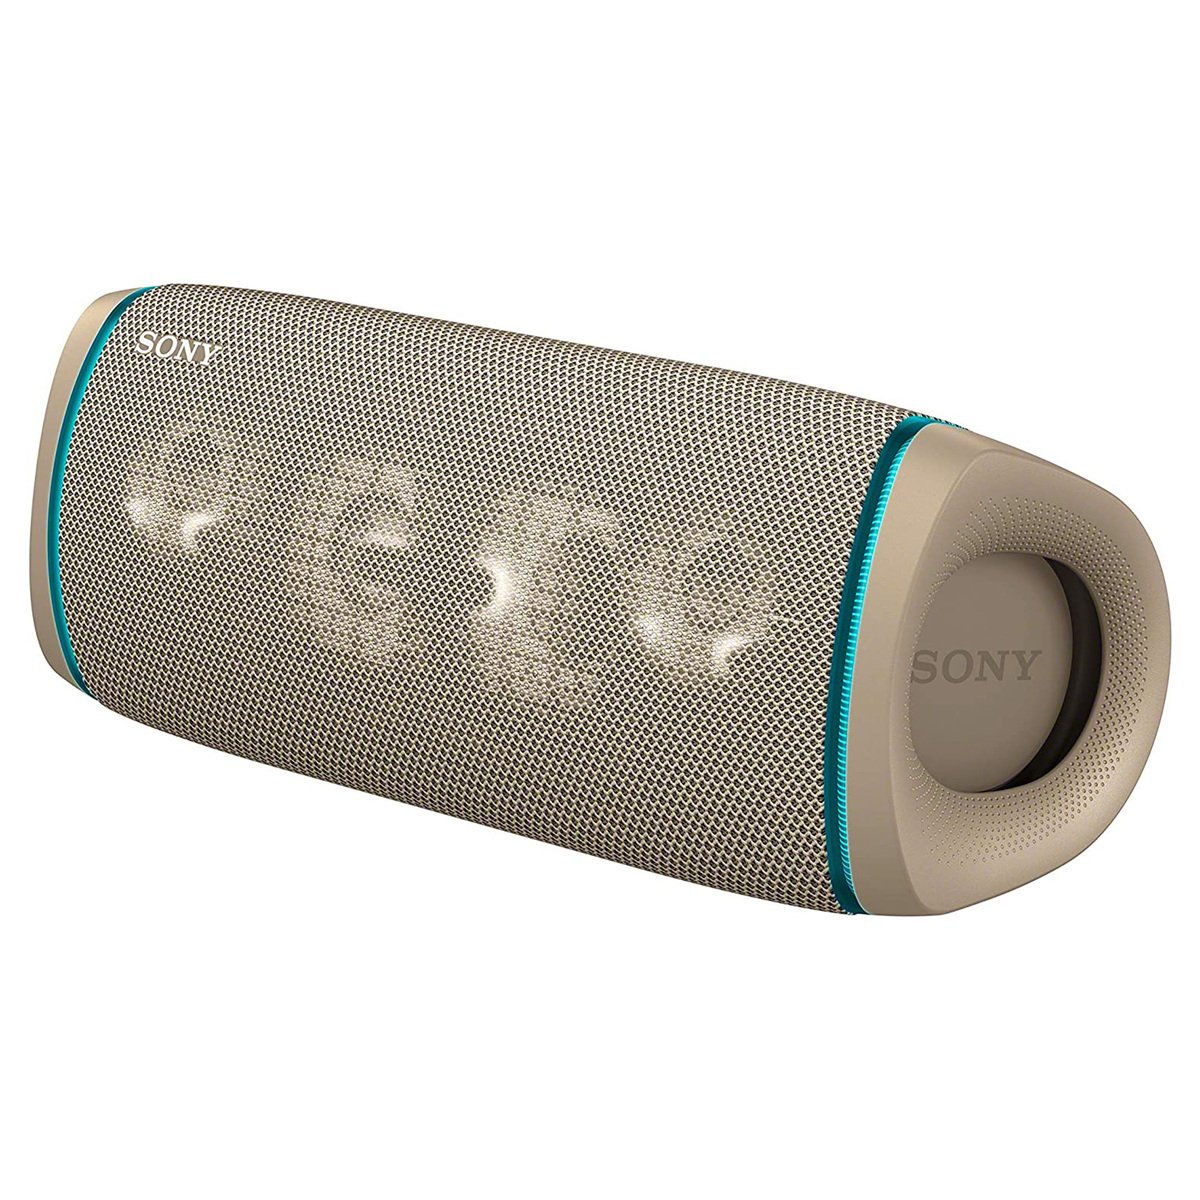 Sony SRS-XB43 EXTRA BASS Wireless Portable Speaker IP67 Waterproof Bluetooth and Built In Mic for Phone Calls, Cream